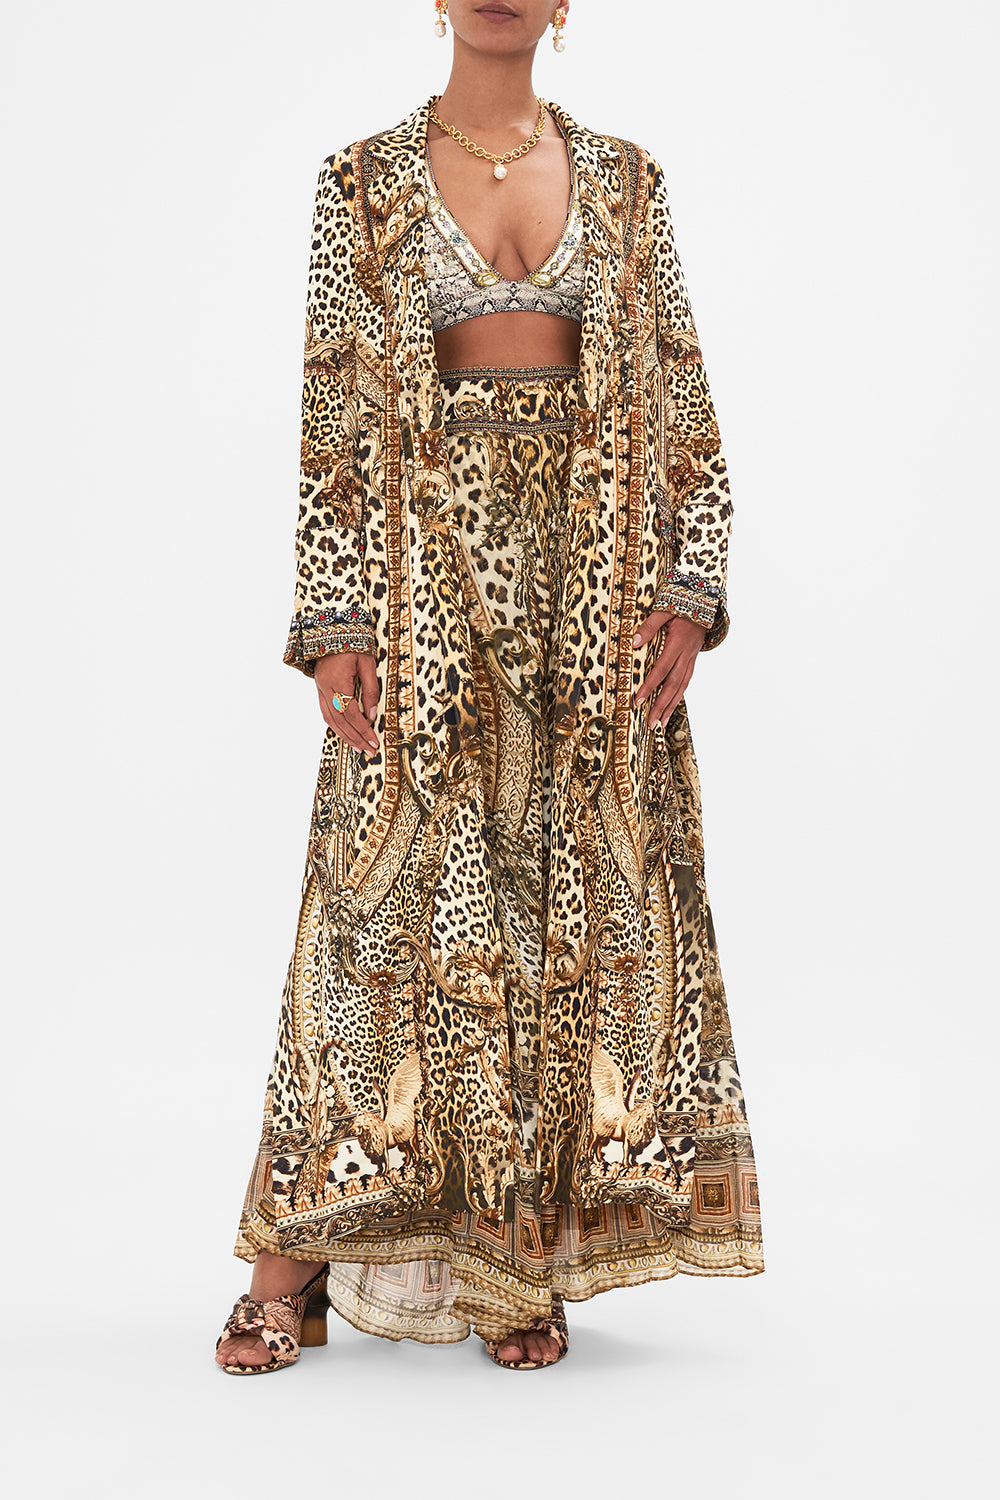 Front view of model wearing CAMILLA Leopard print coat in Standing Ovation print